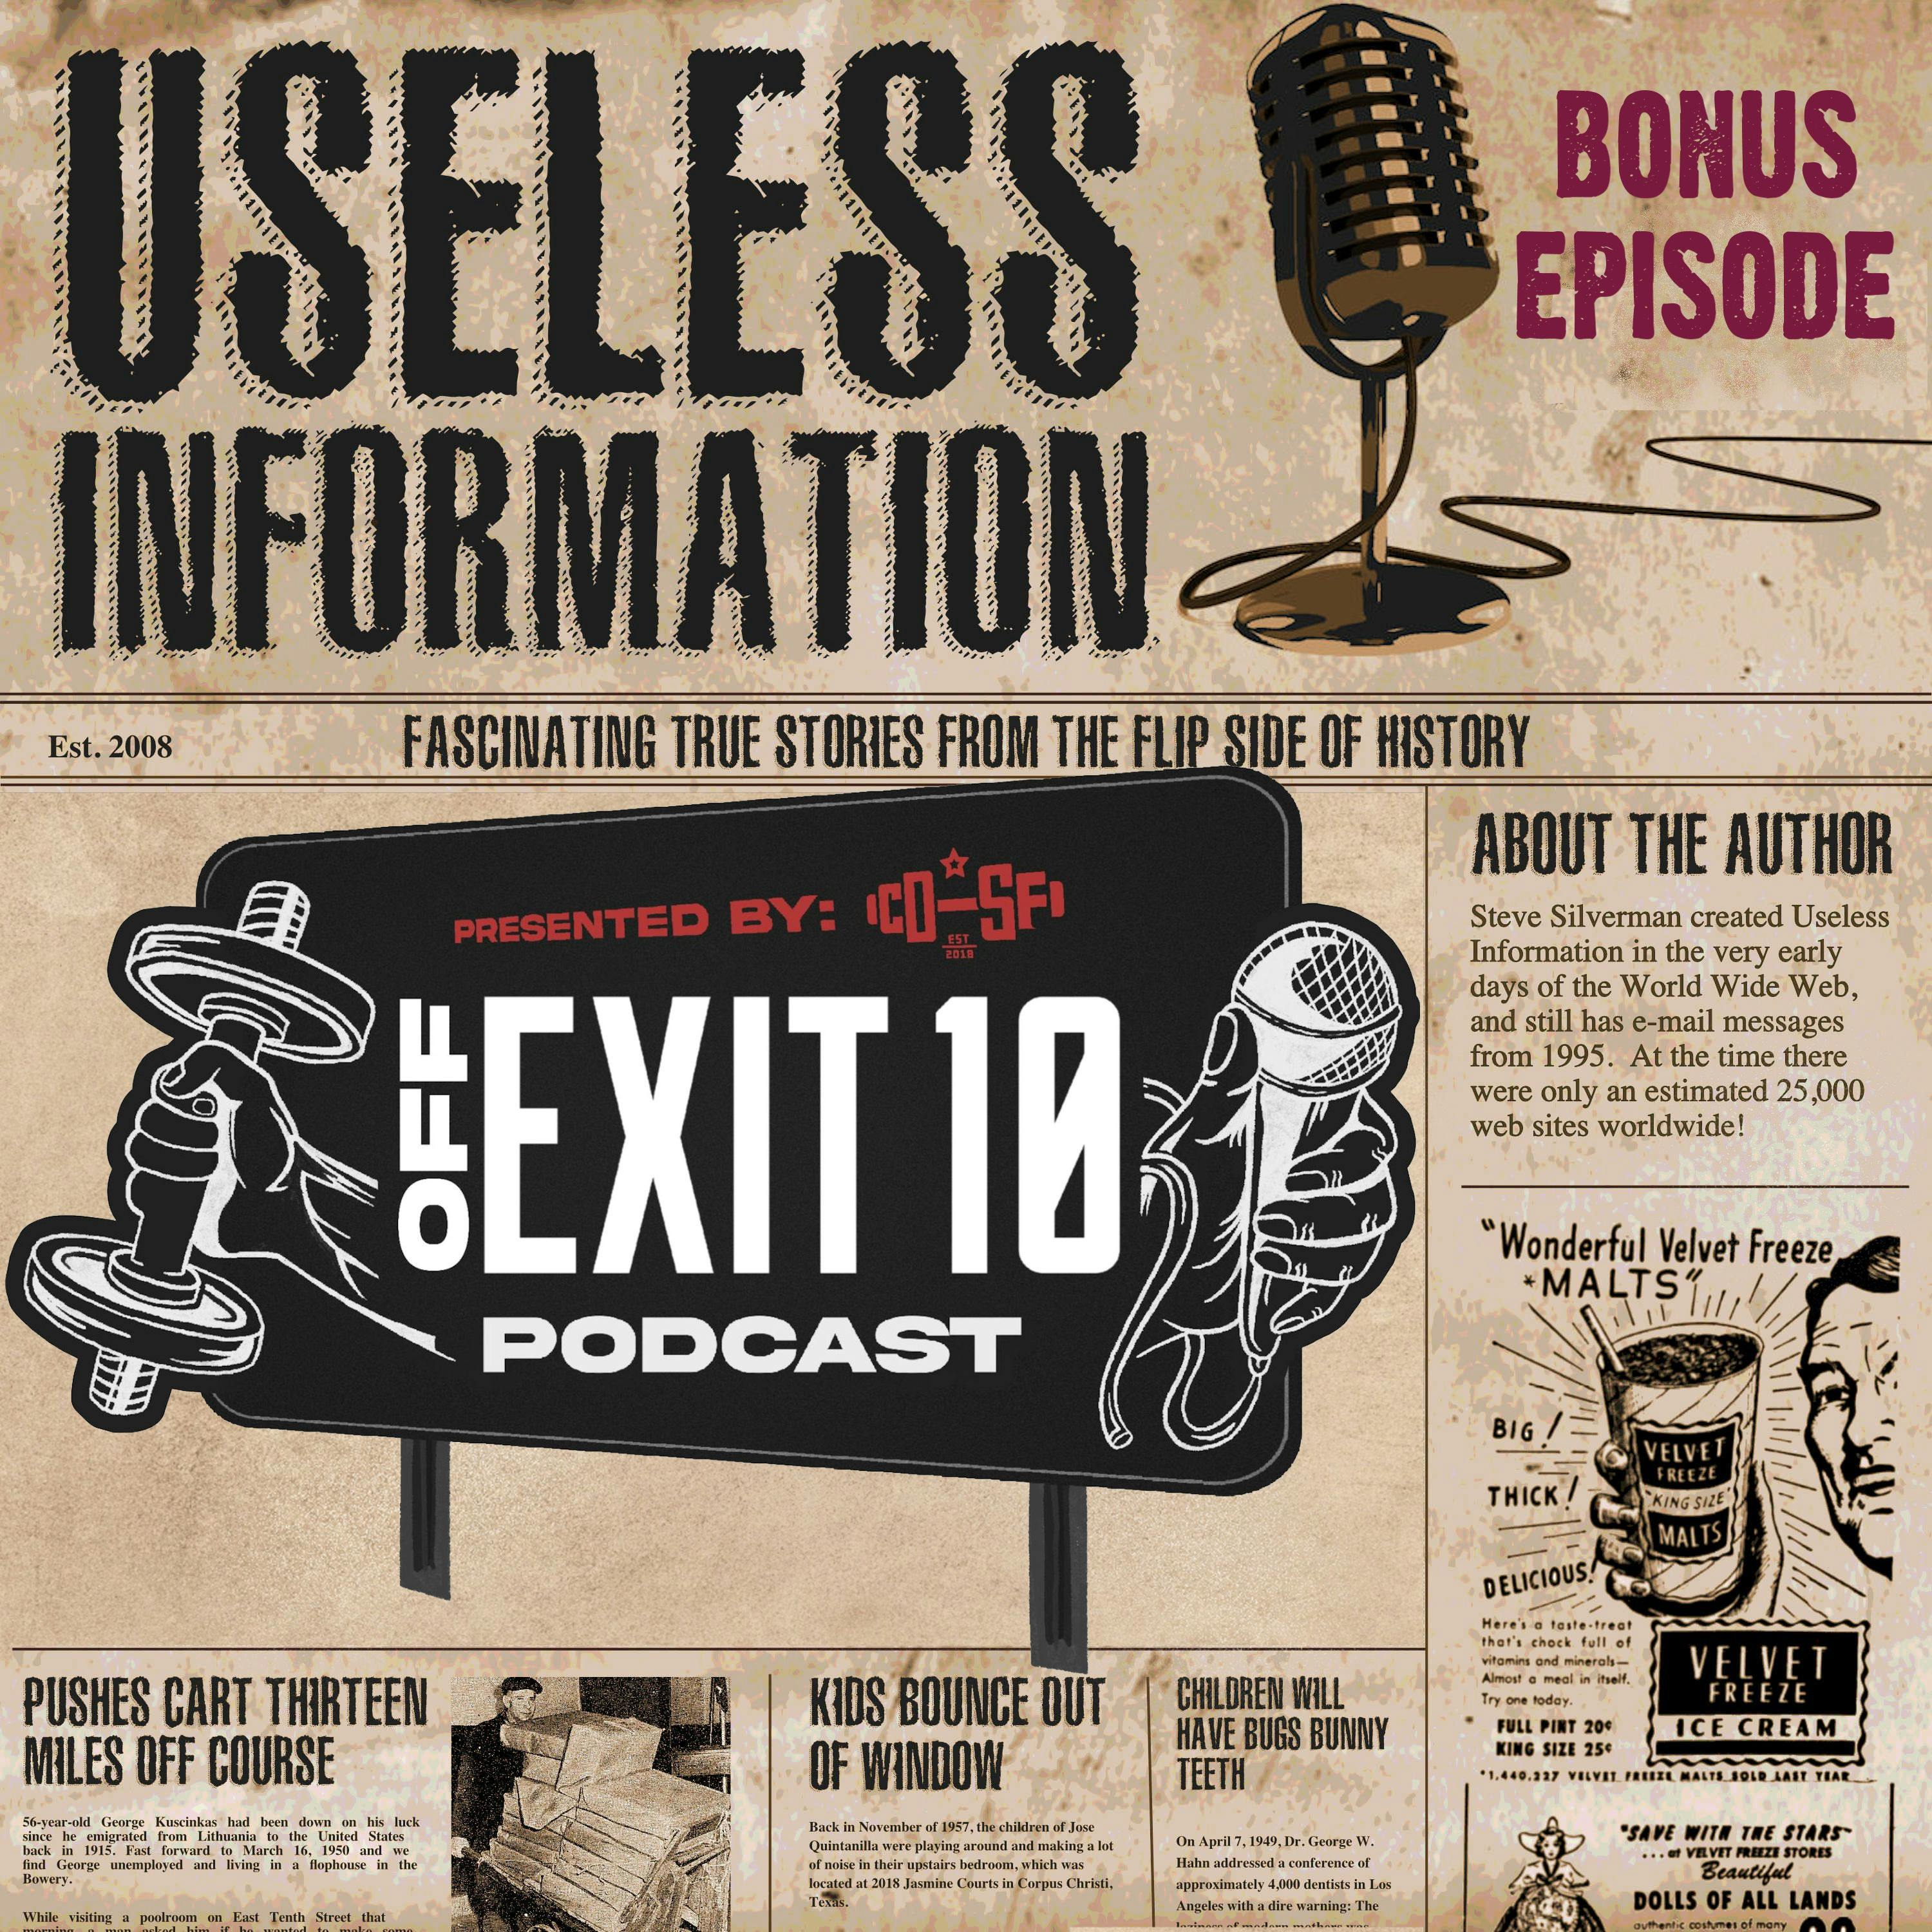 Bonus Episode: I Am a Guest on the Off Exit 10 Podcast